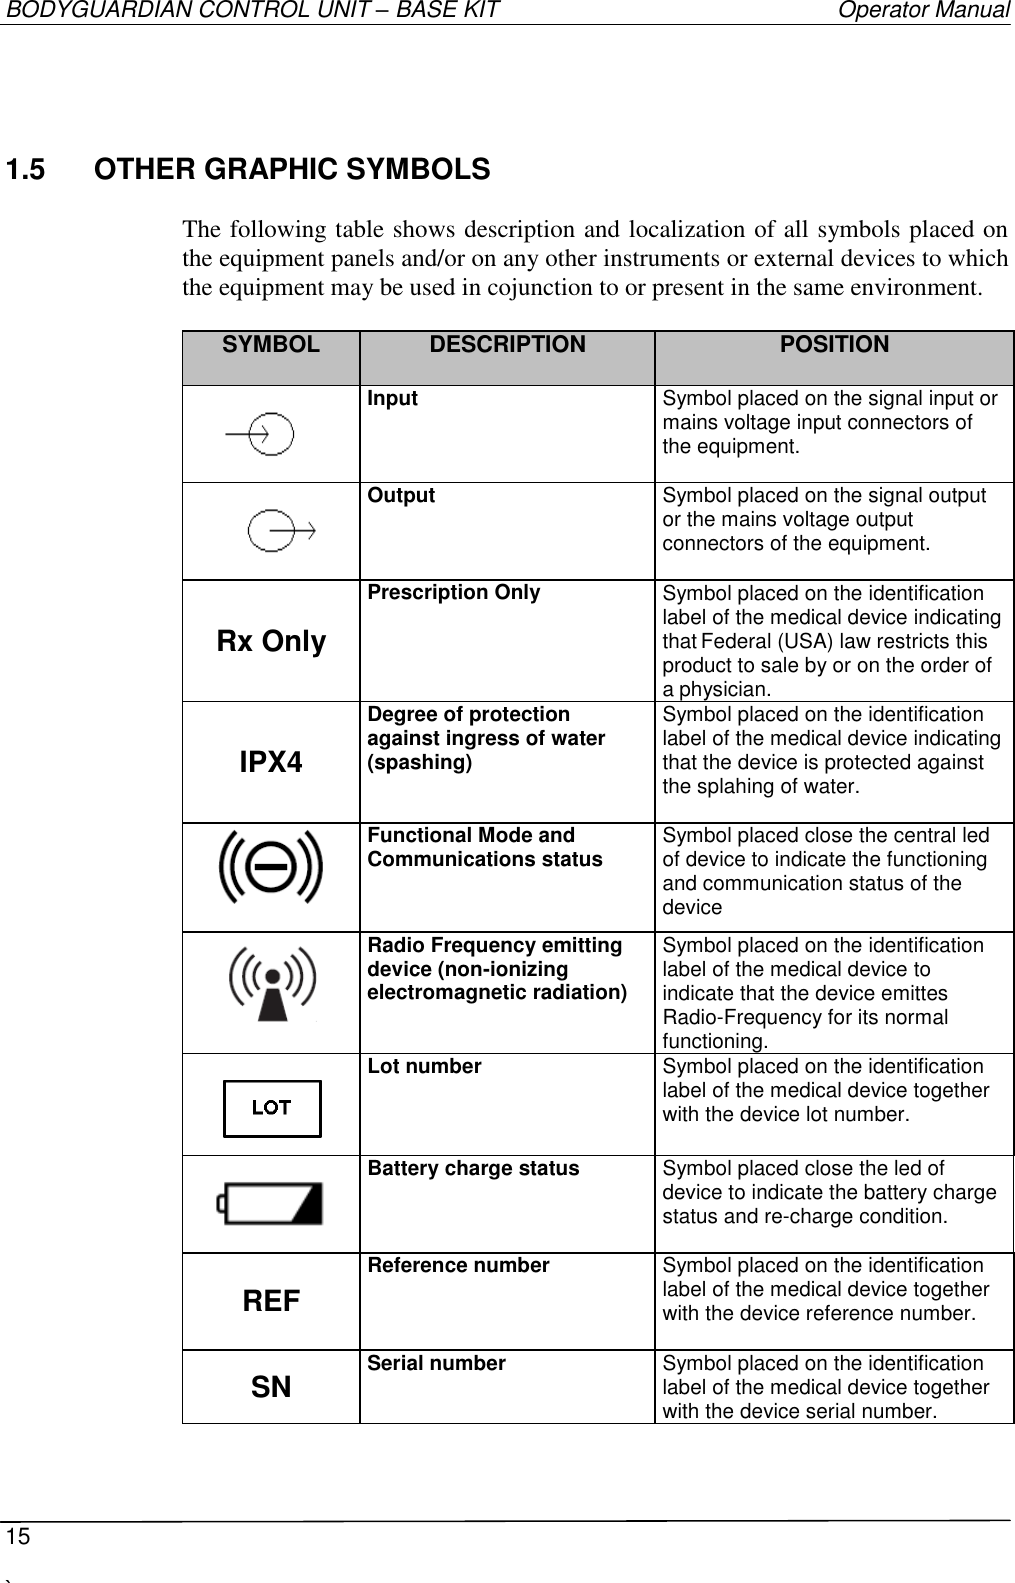 BODYGUARDIAN CONTROL UNIT – BASE KIT   Operator Manual  15  `   1.5  OTHER GRAPHIC SYMBOLS  The following table shows description and localization of all symbols placed on the equipment panels and/or on any other instruments or external devices to which the equipment may be used in cojunction to or present in the same environment.  SYMBOL  DESCRIPTION POSITION    Input Symbol placed on the signal input or mains voltage input connectors of the equipment.   Output Symbol placed on the signal output or the mains voltage output connectors of the equipment.  Rx Only Prescription Only Symbol placed on the identification label of the medical device indicating that Federal (USA) law restricts this product to sale by or on the order of a physician. IPX4 Degree of protection against ingress of water (spashing) Symbol placed on the identification label of the medical device indicating that the device is protected against the splahing of water.    Functional Mode and Communications status Symbol placed close the central led of device to indicate the functioning and communication status of the device    Radio Frequency emitting device (non-ionizing electromagnetic radiation) Symbol placed on the identification label of the medical device to indicate that the device emittes Radio-Frequency for its normal functioning.    Lot number Symbol placed on the identification label of the medical device together with the device lot number.  Battery charge status Symbol placed close the led of device to indicate the battery charge status and re-charge condition.  REF Reference number Symbol placed on the identification label of the medical device together with the device reference number.  SN Serial number Symbol placed on the identification label of the medical device together with the device serial number. 